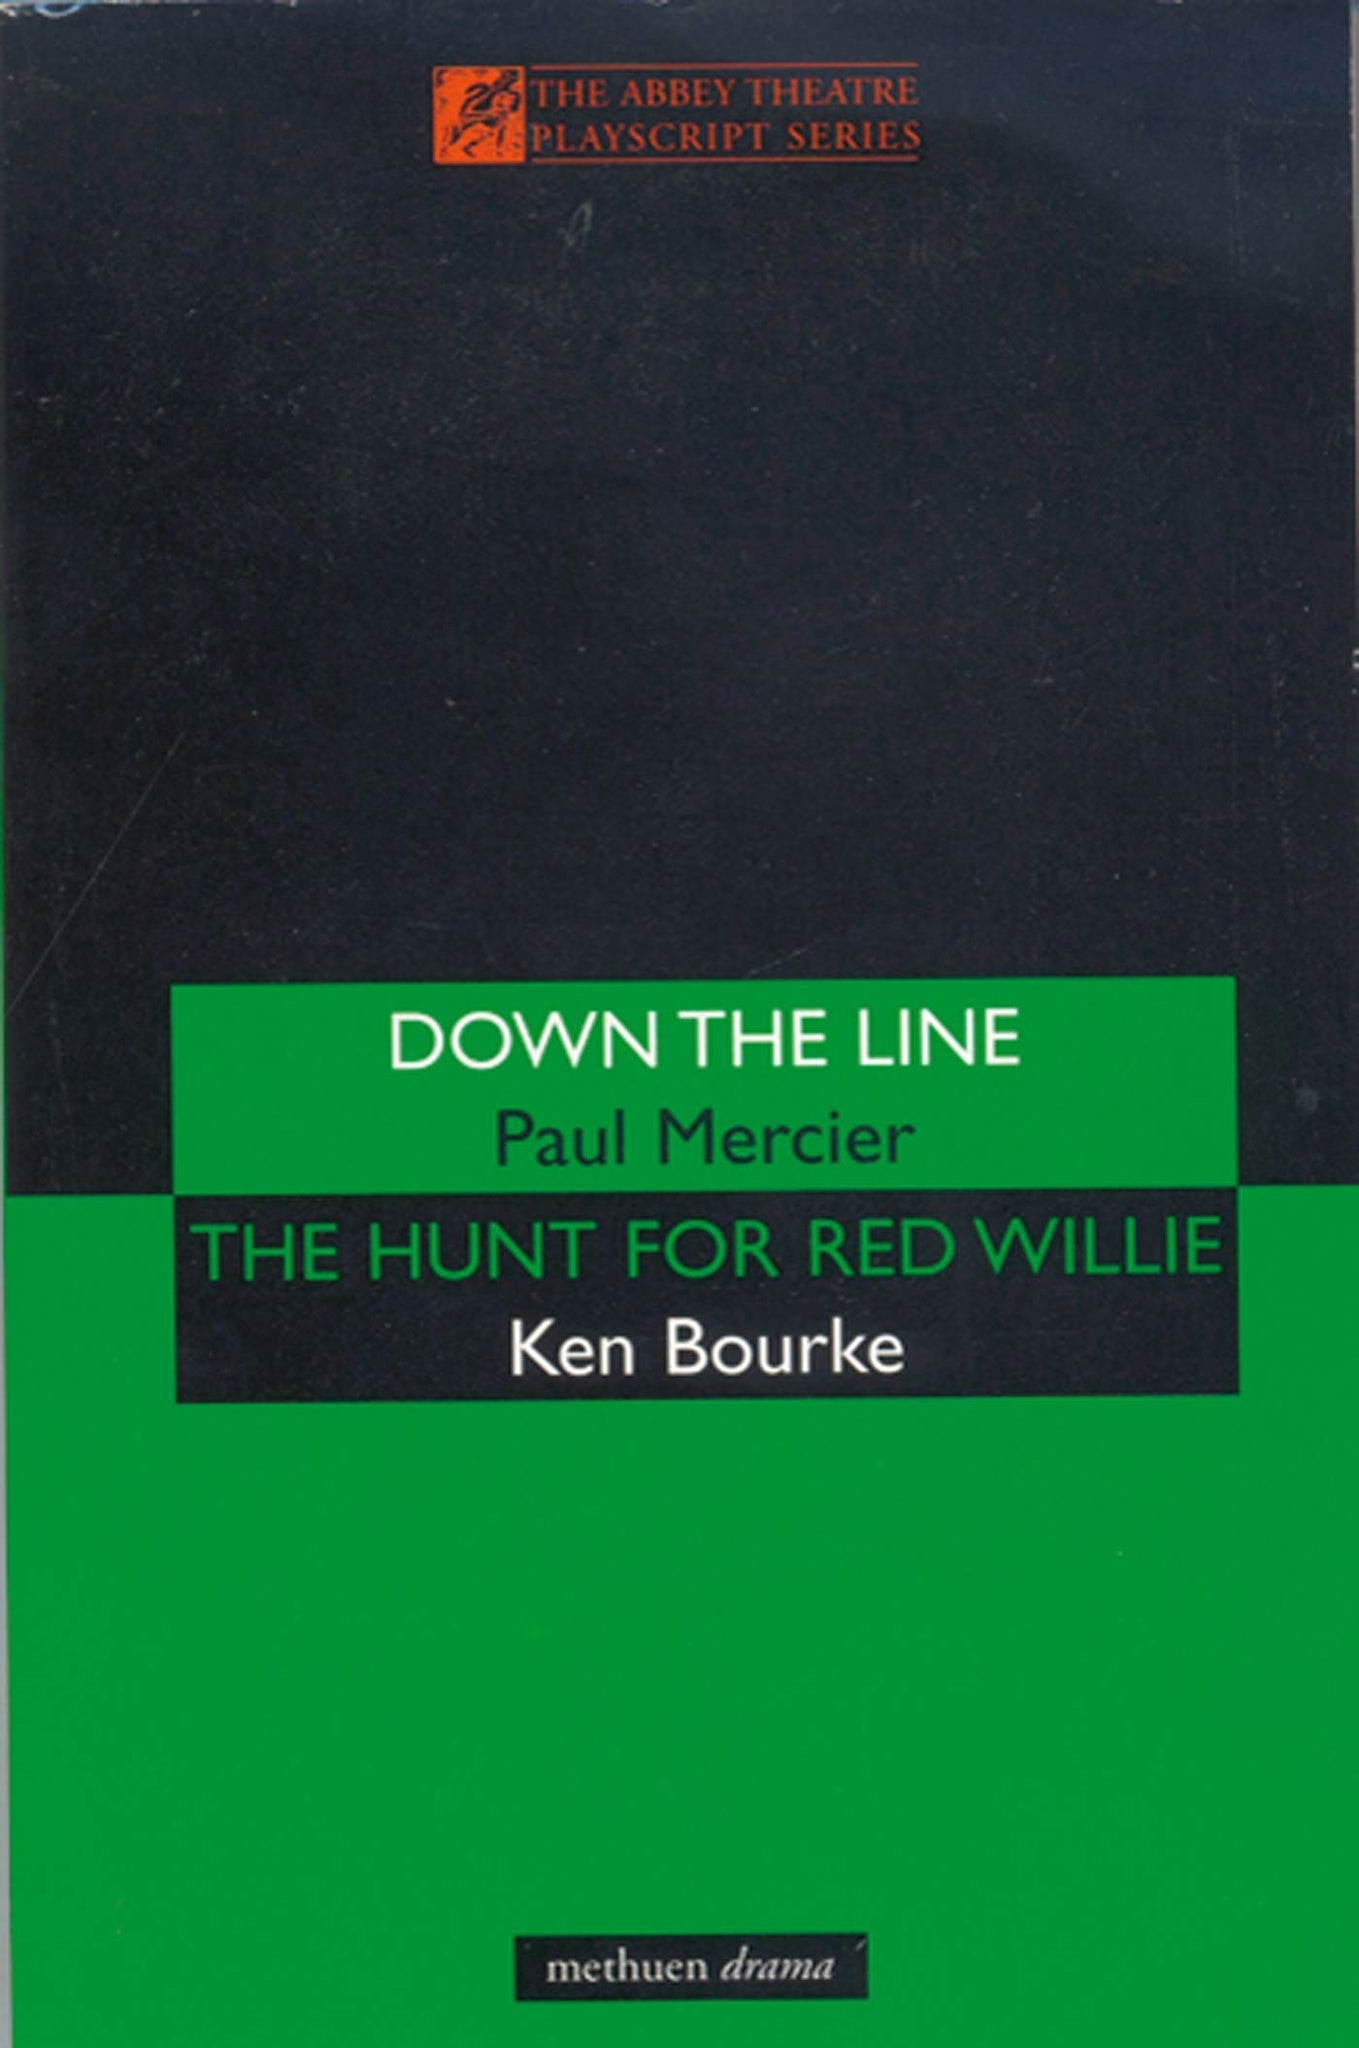 'Down The Line' & 'The Hunt For R